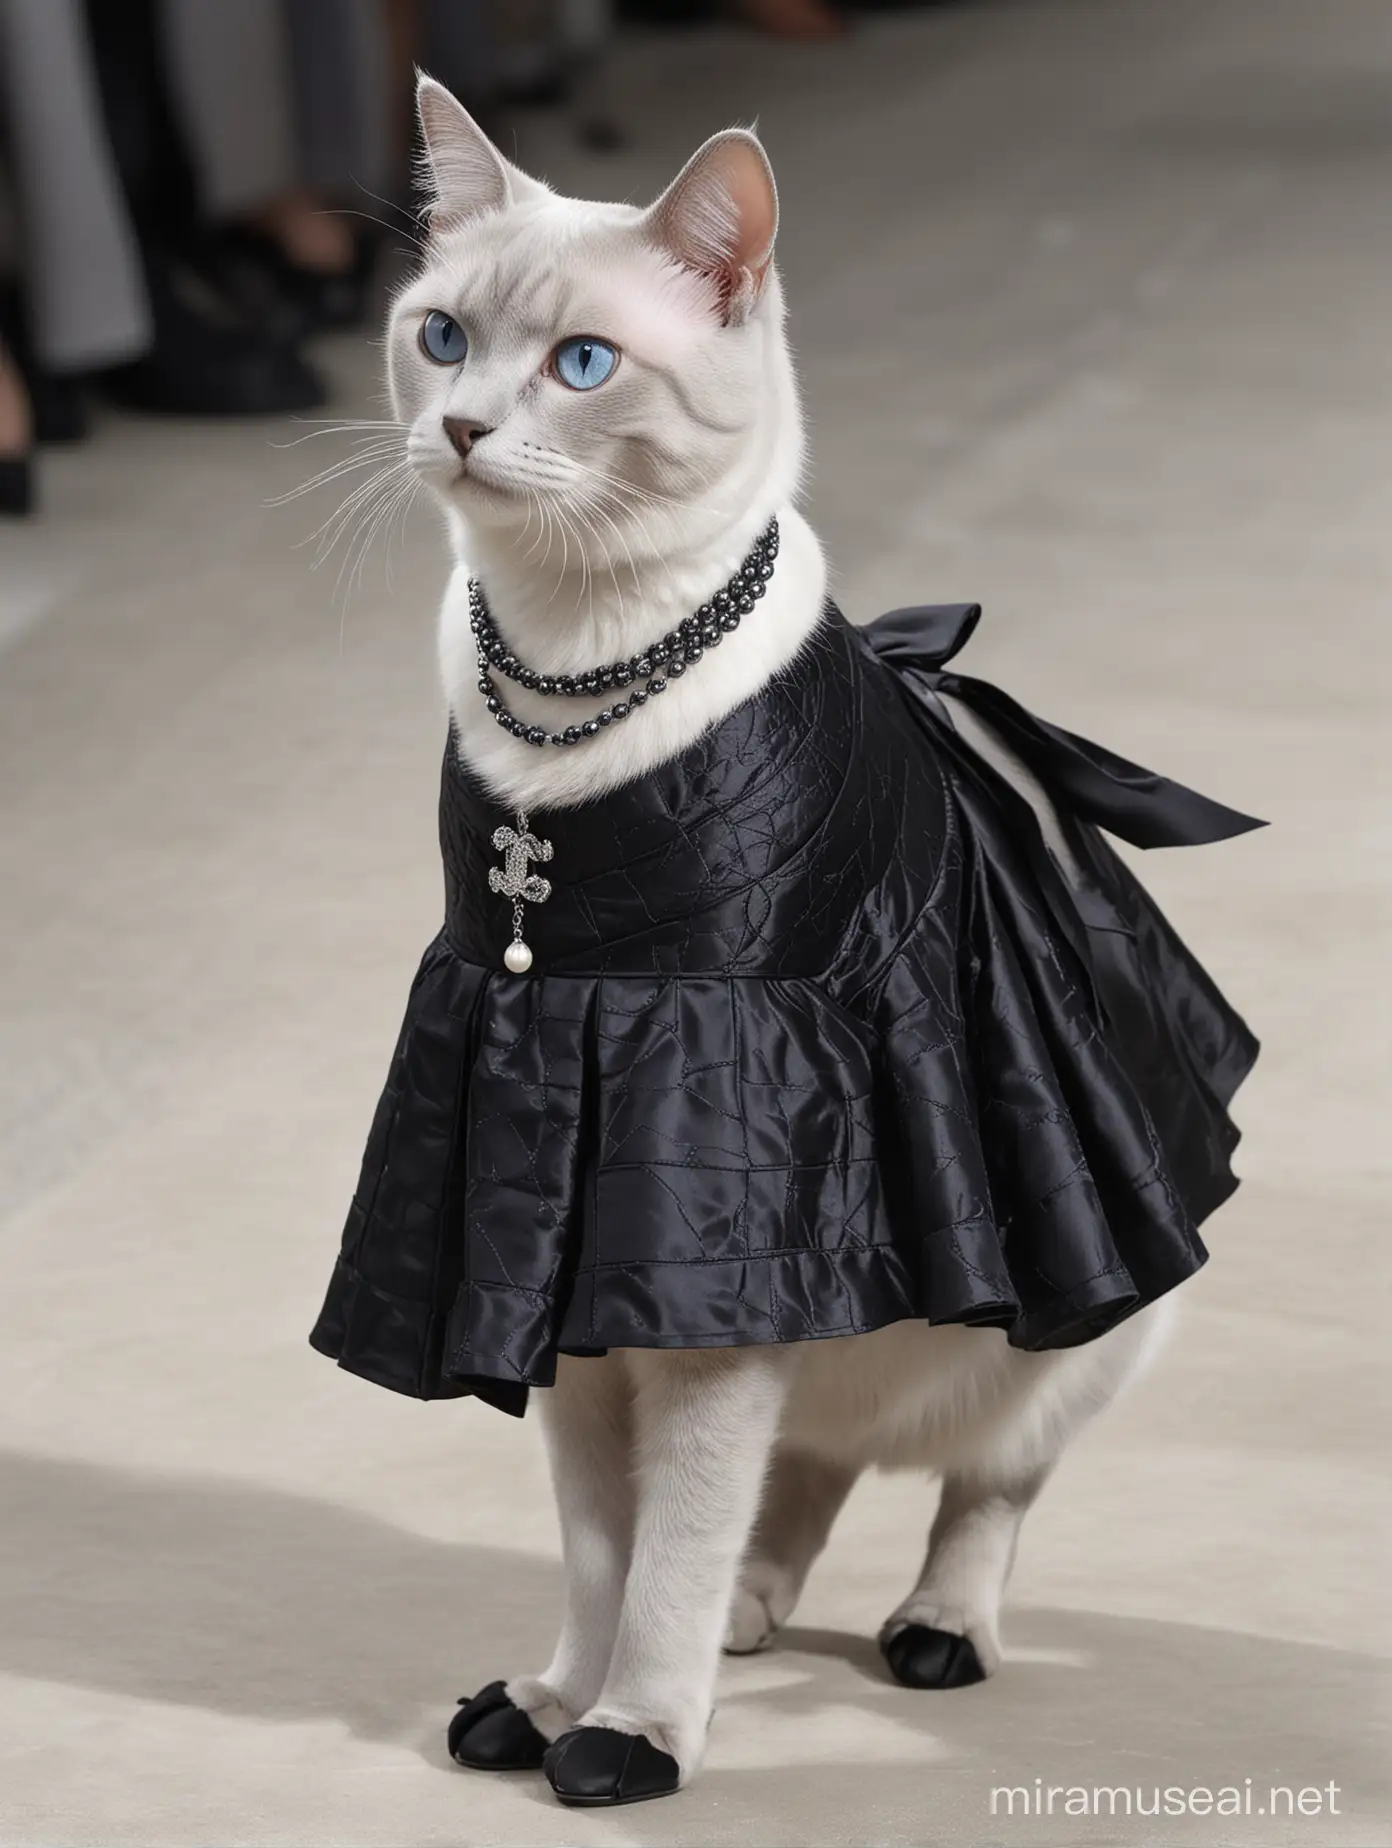 Side view, anthropomorphic, a silver-gray haired Maine Maine cat with blue eyes, wearing a black Chanel haute couture dress, heels, Milan Fashion Week, surrealist photography, close-up, runway walk, white camellia pearl necklace, fashion haute, runway lighting, -ar 3:4-s250-v 6.0